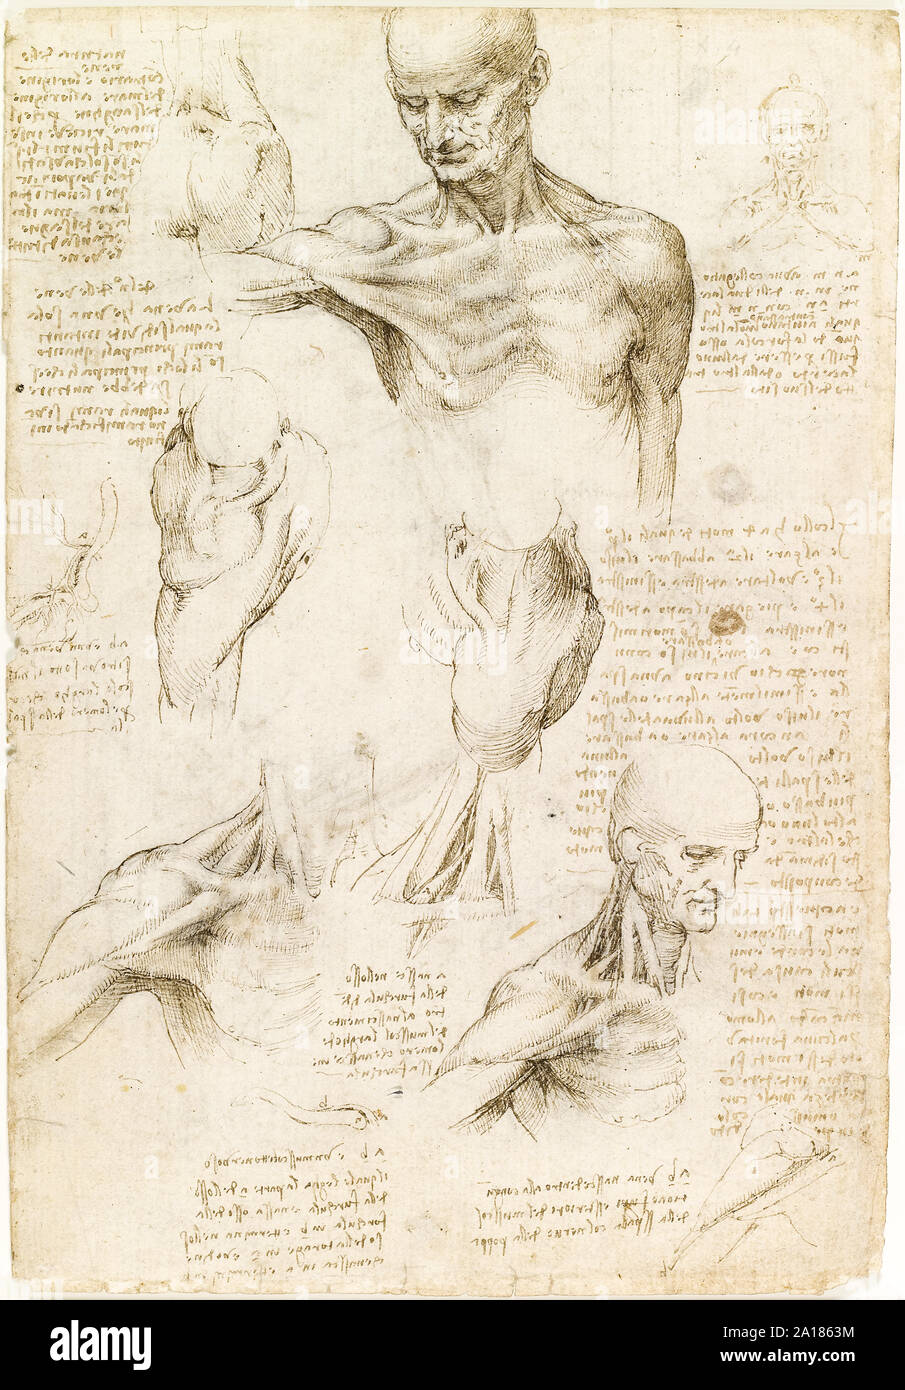 Superficial Anatomy of the Shoulder and Neck by Leonardo da Vinci (1452-1519) made between 1510-12 showing the muscles of the shoulder human. Stock Photo